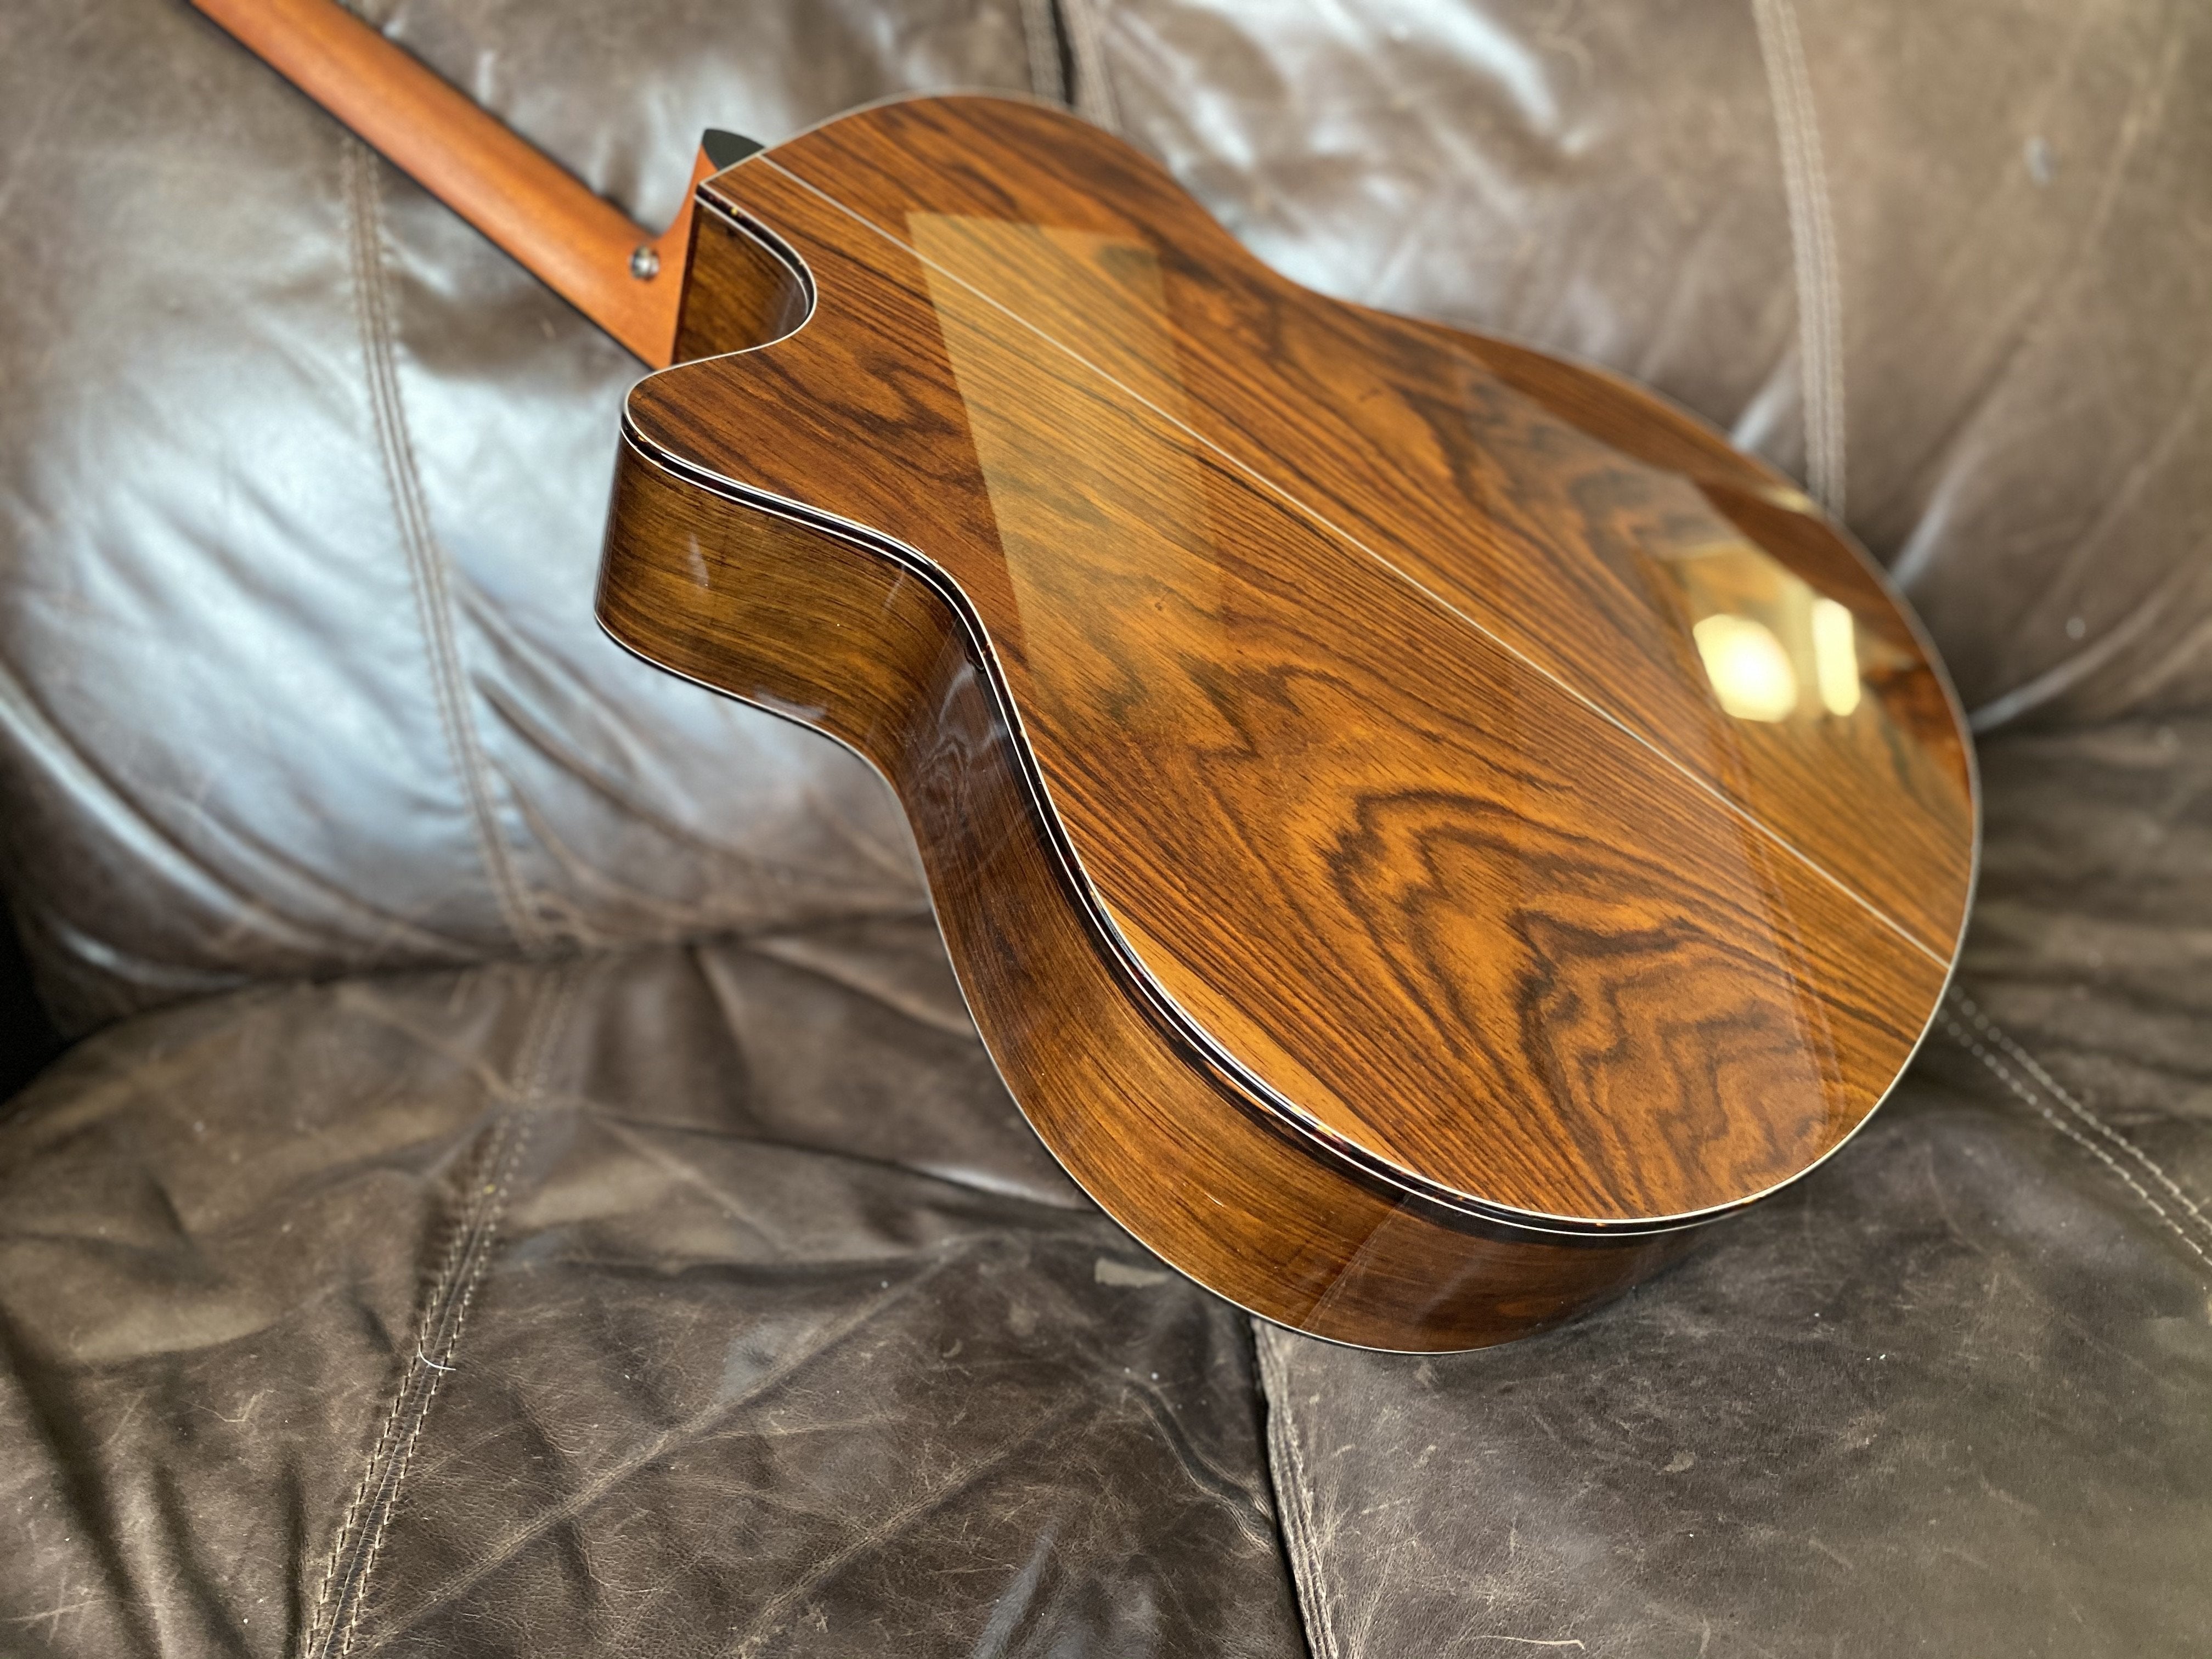 Furch Rainbow Series GCSC (Spruce / Cocobolo), Acoustic Guitar for sale at Richards Guitars.